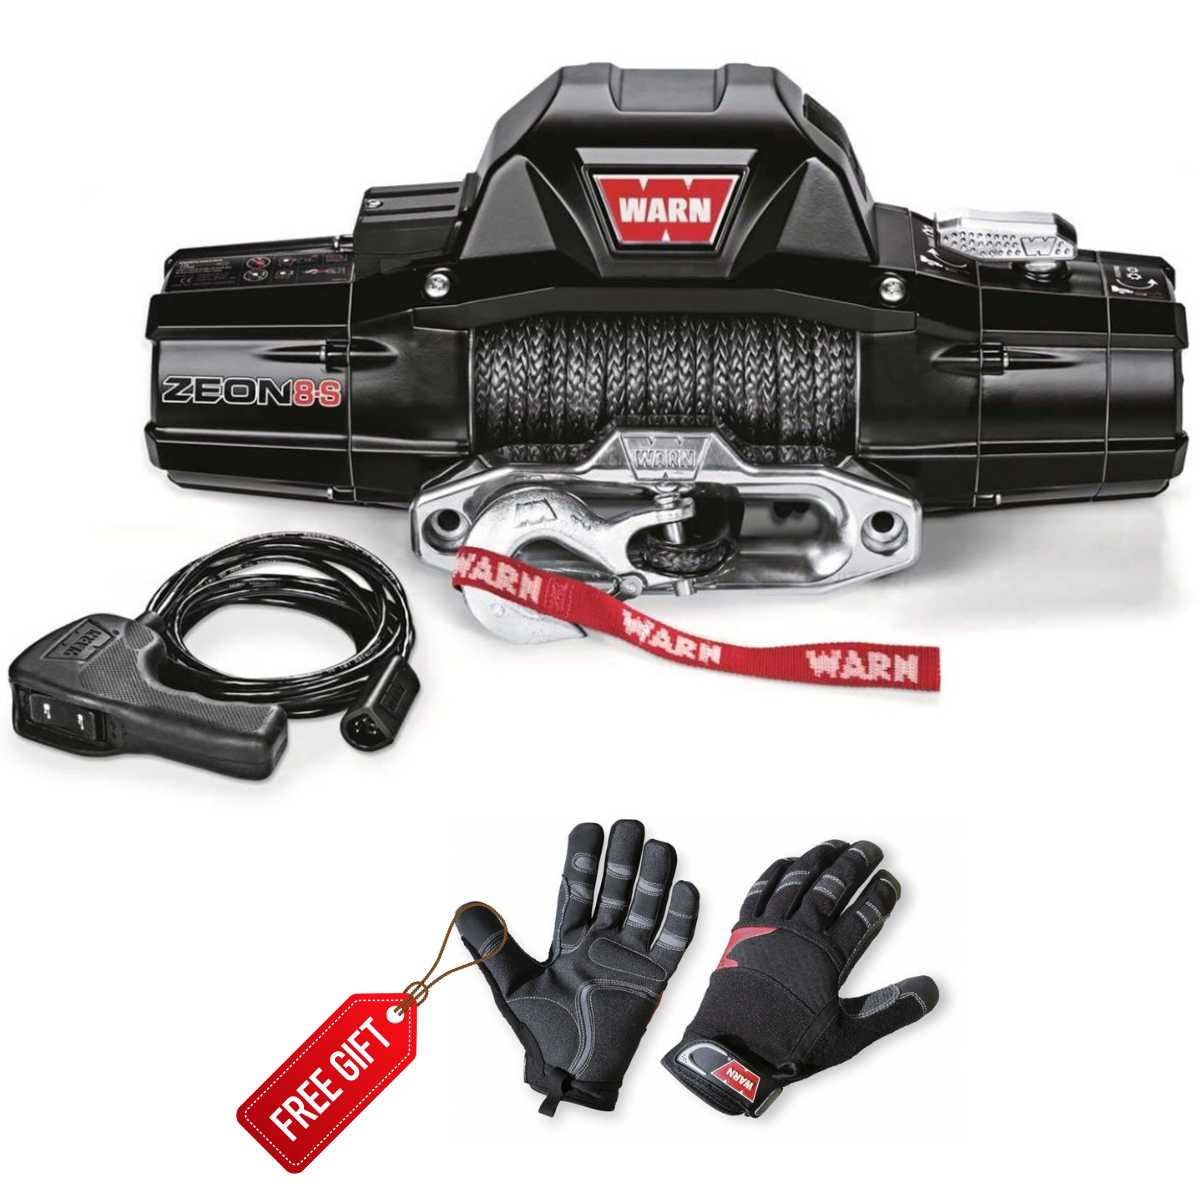 WARN ZEON 8-S 8000lbs 12V Winch - Synthetic Rope